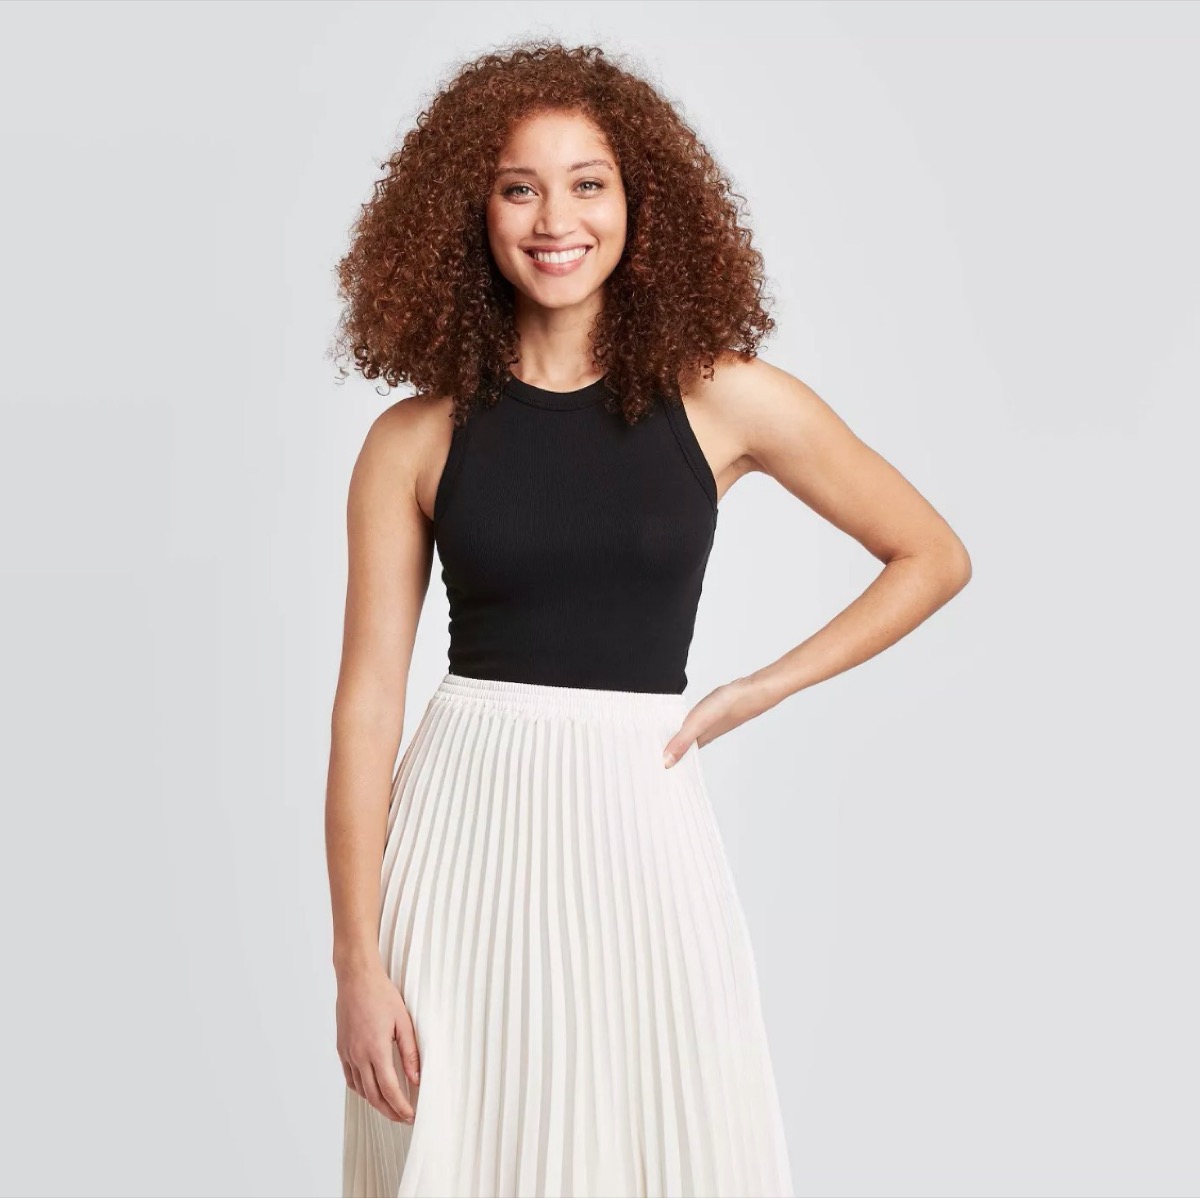 young woman in black tank top and white skirt